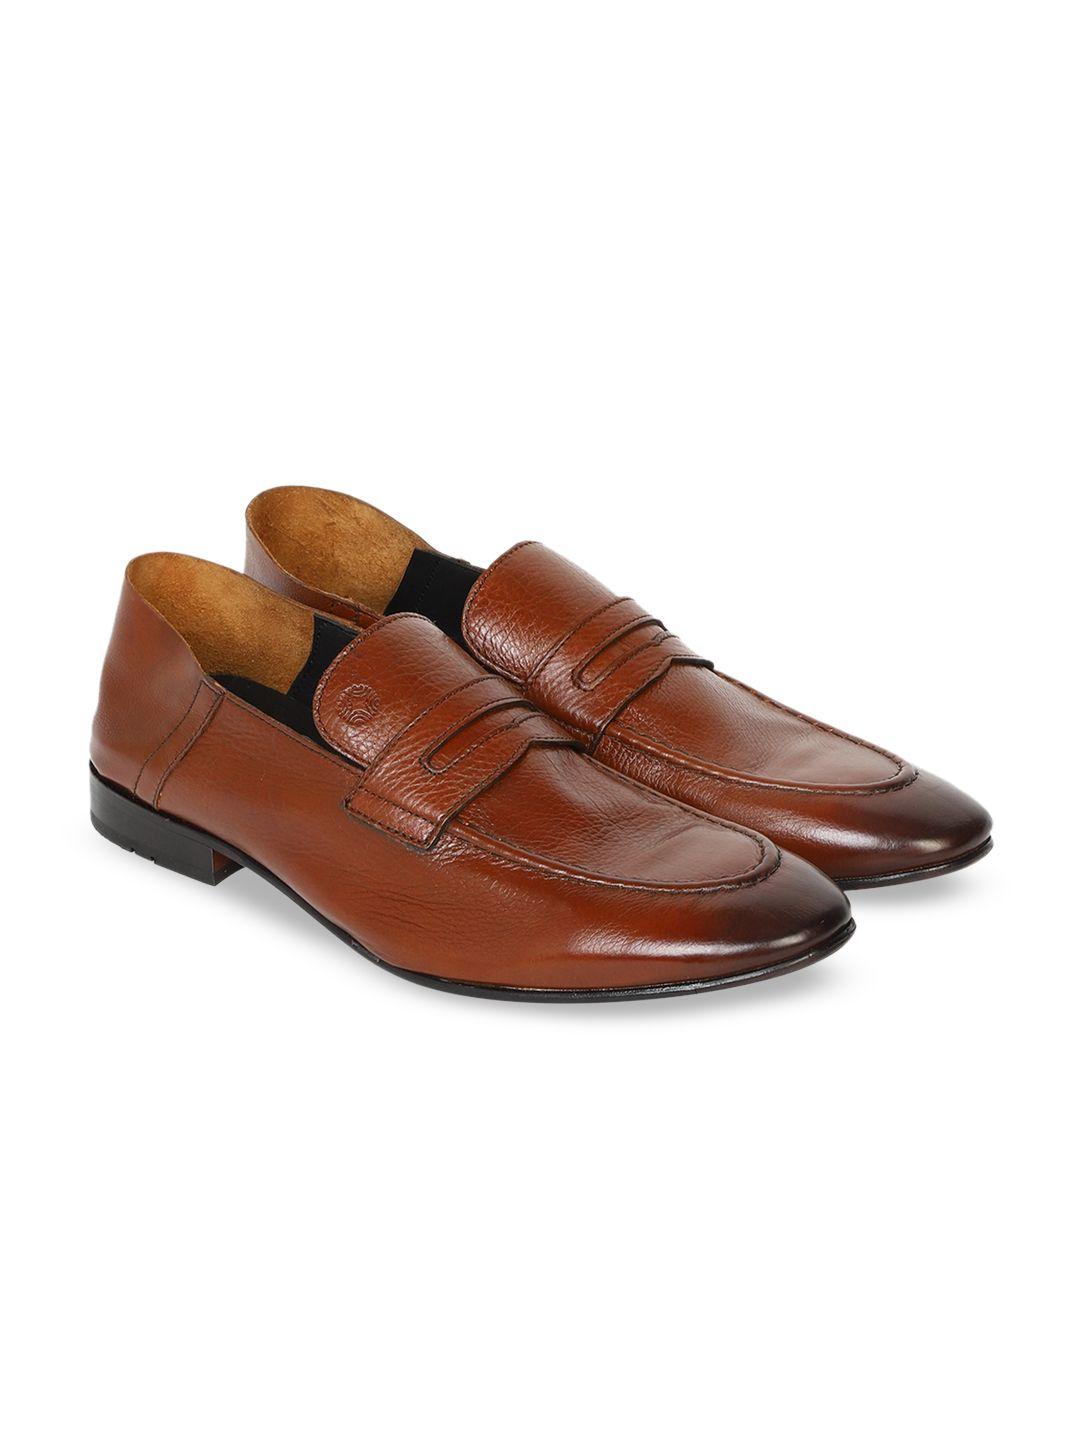 ruosh-men-red-leather-loafers